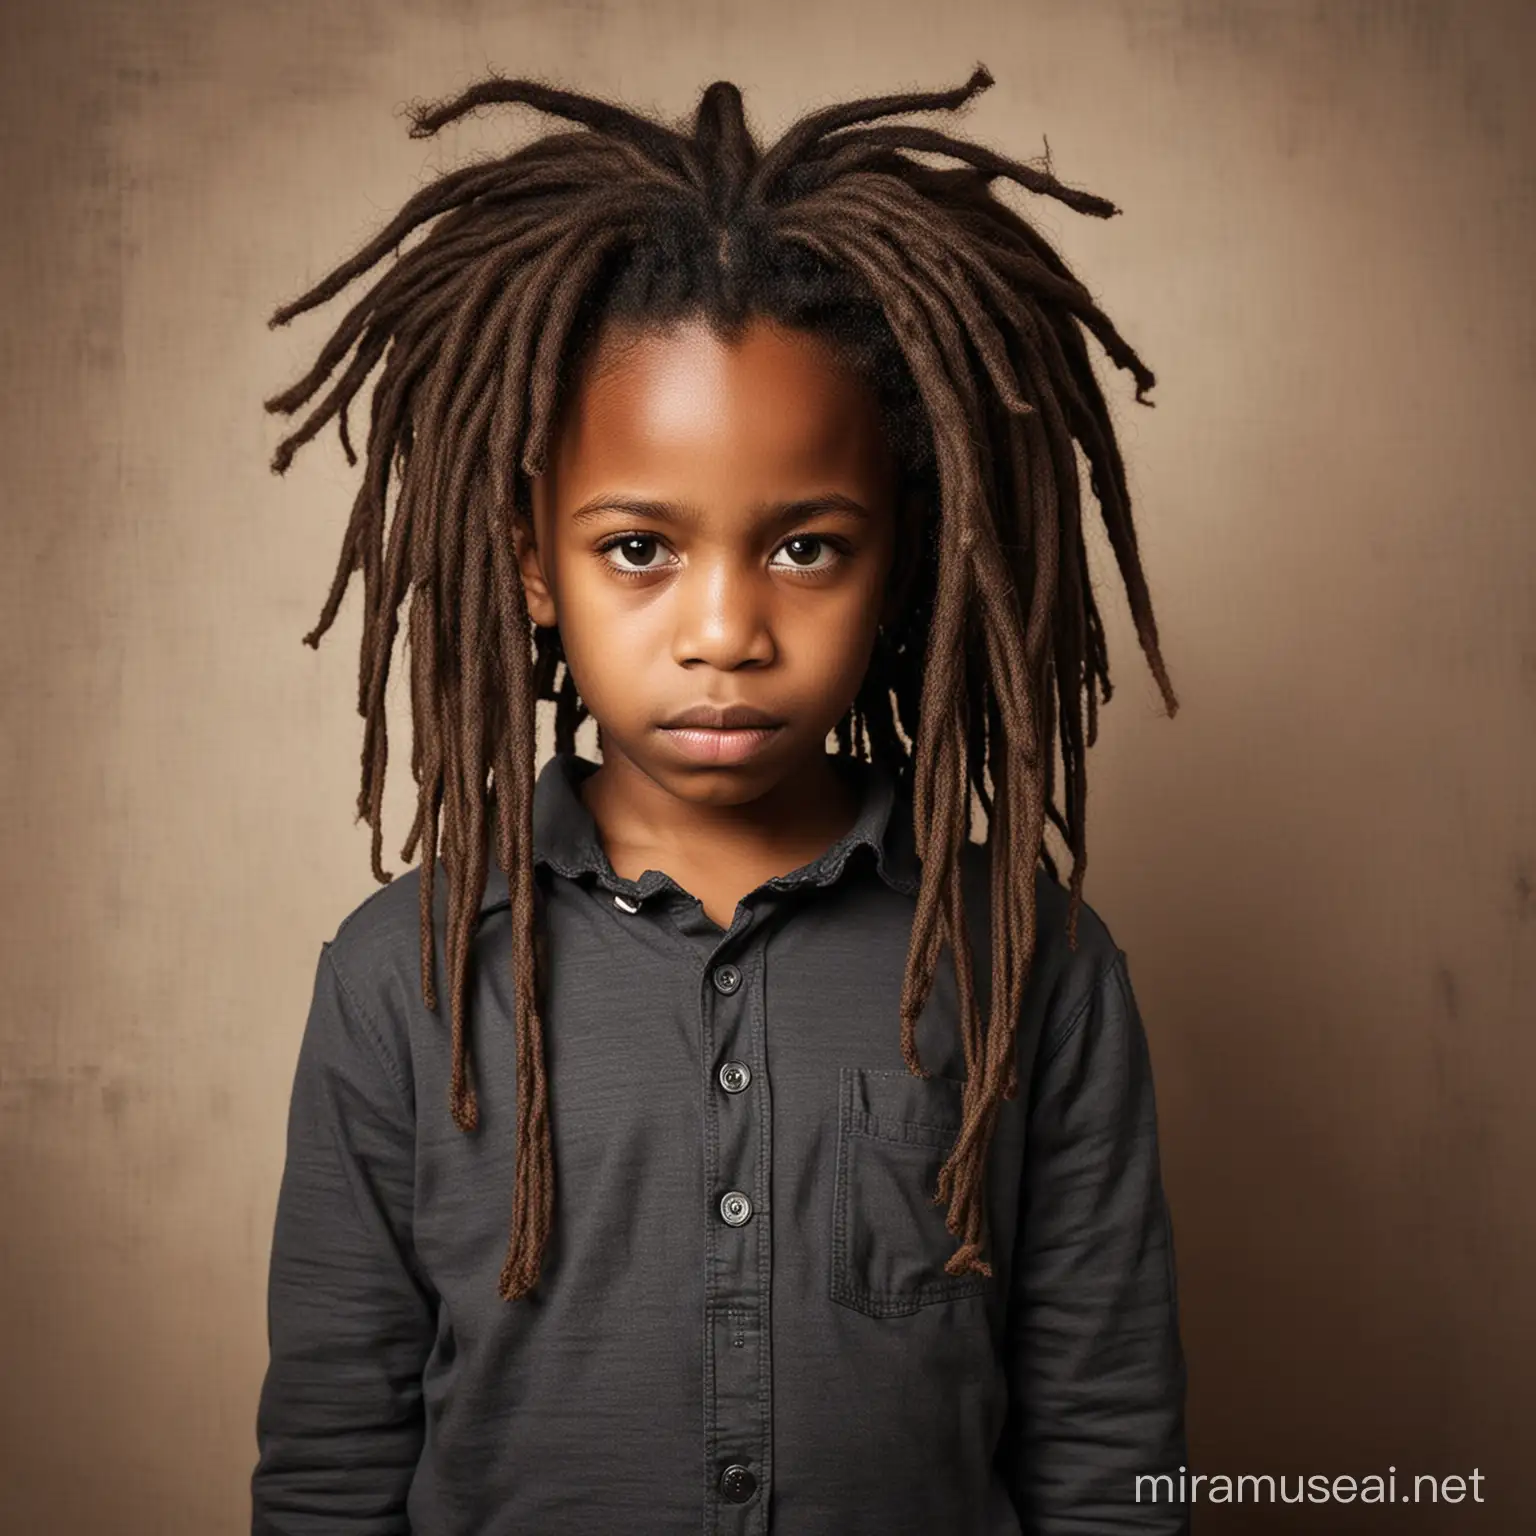 Young Black Child with Dreadlocks Looking Sad